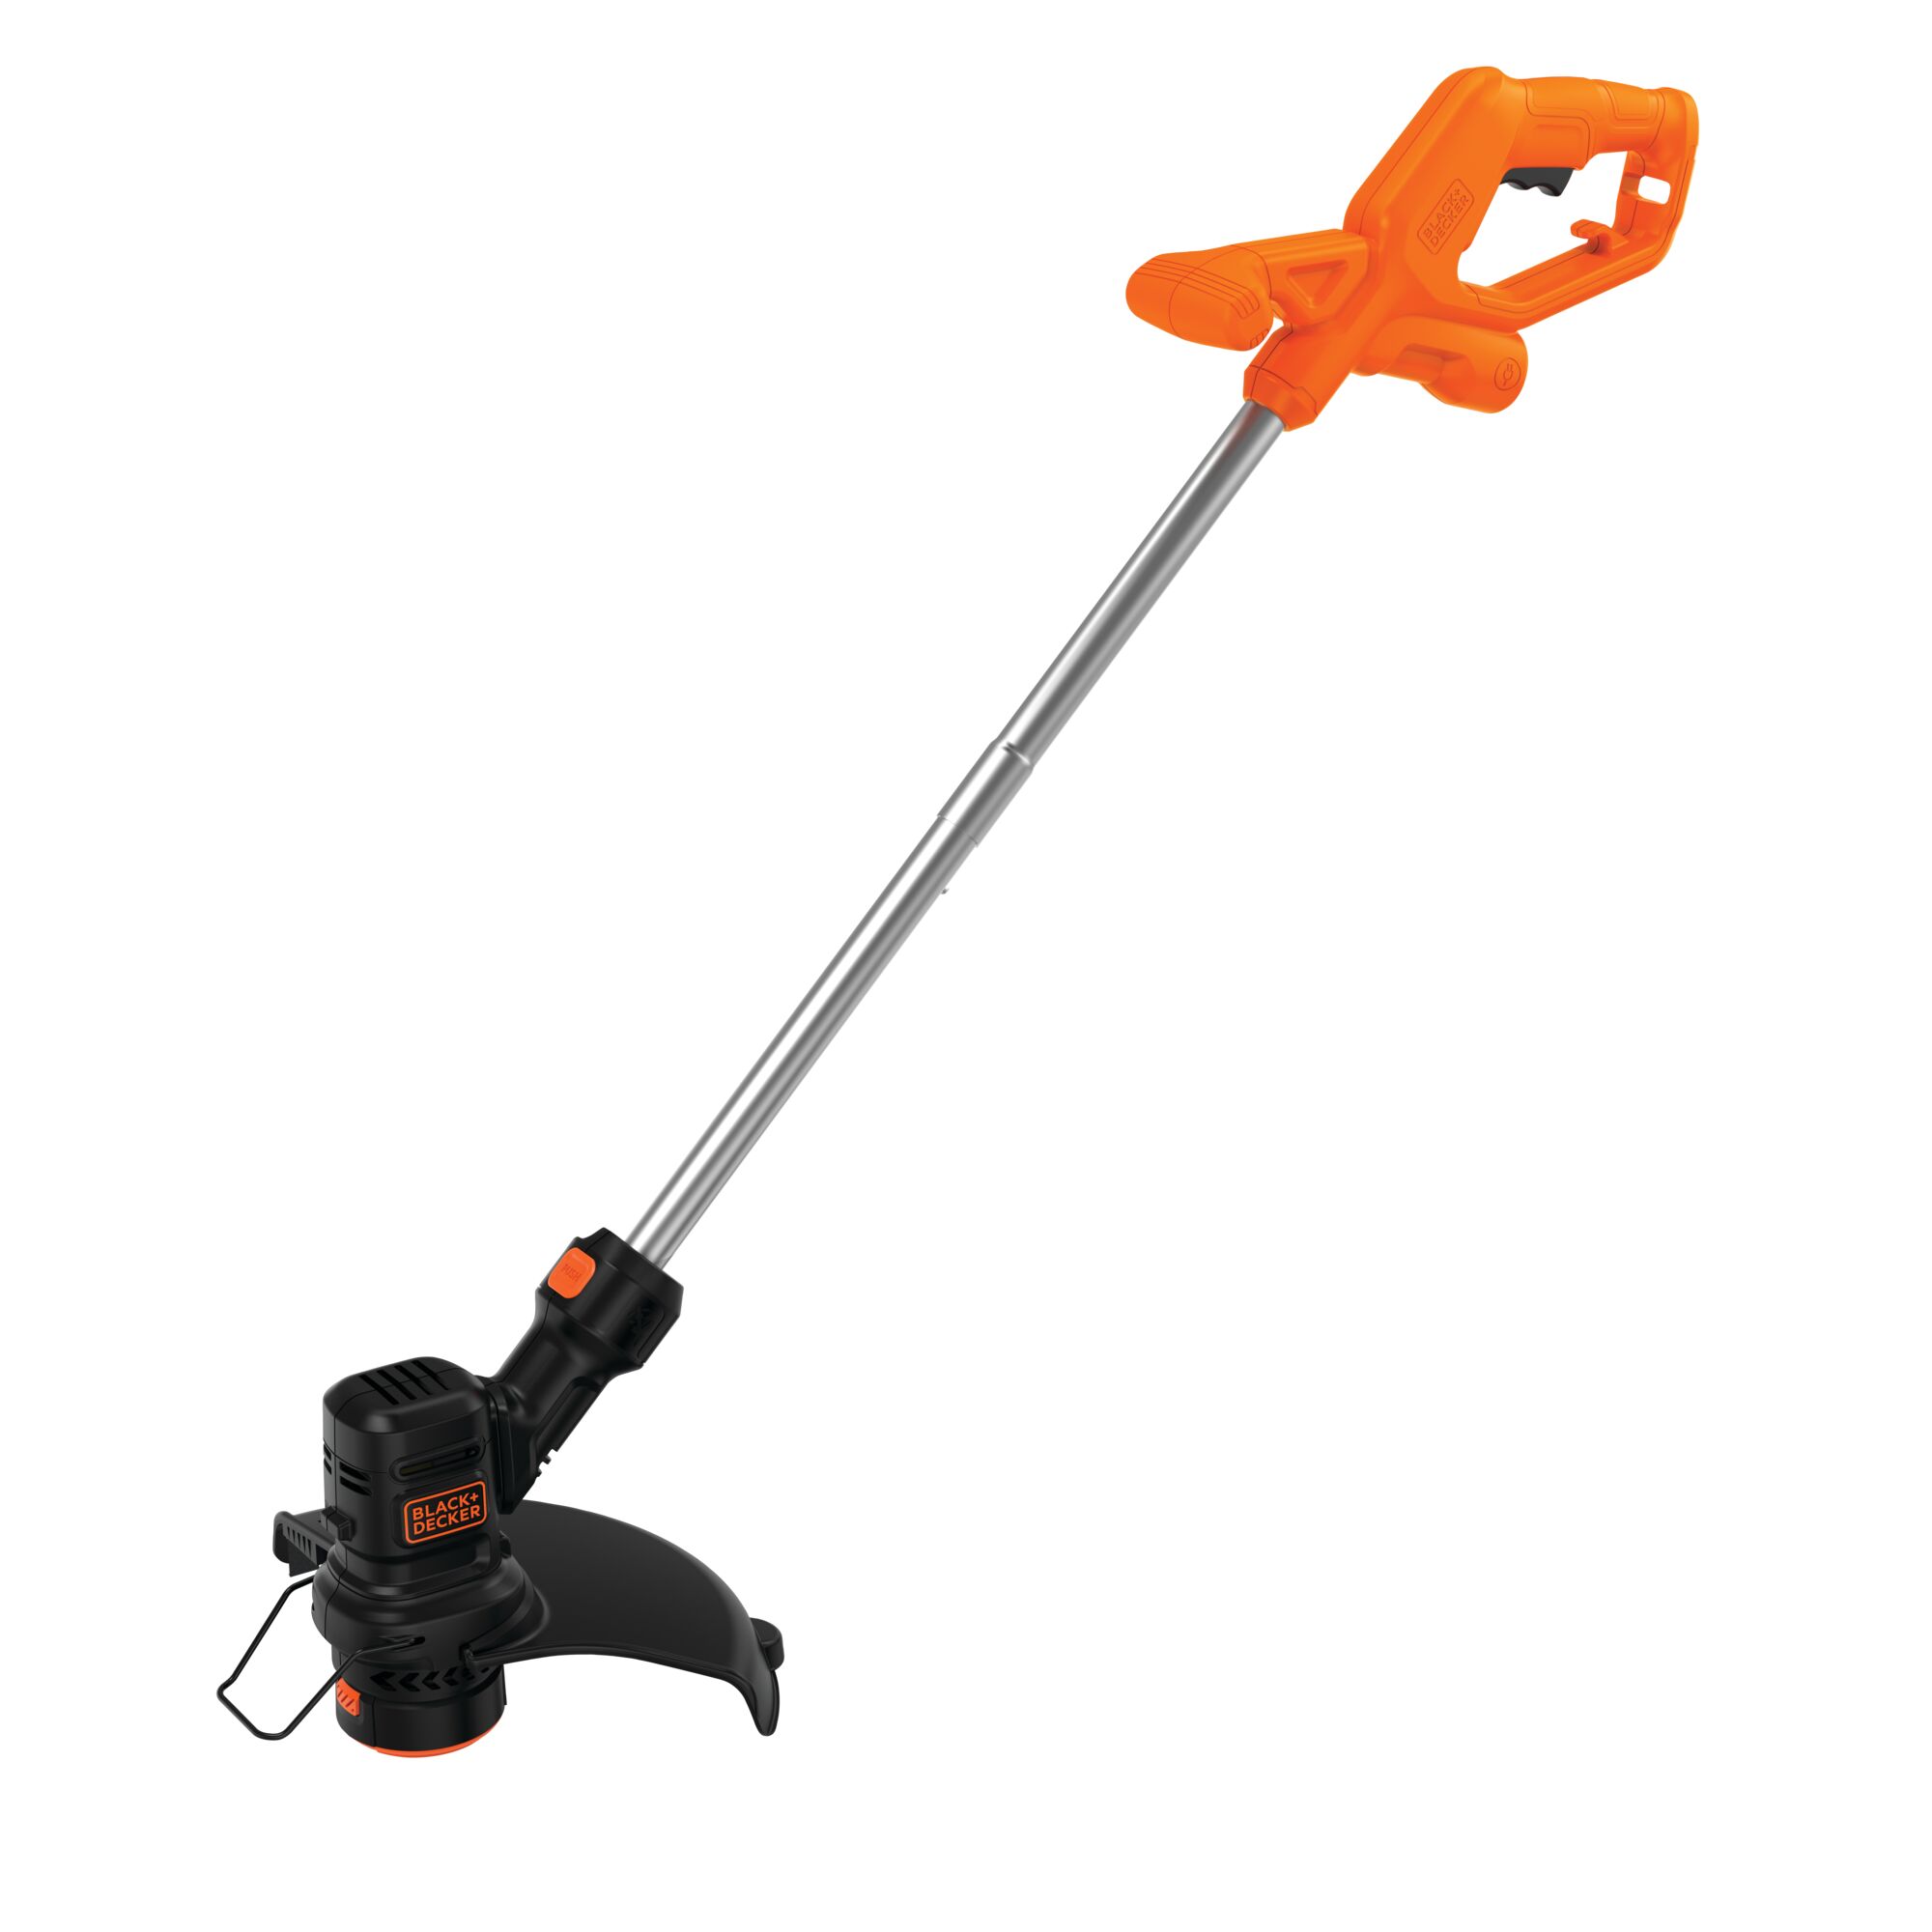 Profile of 4 Amp 13 inch electric string trimmer.